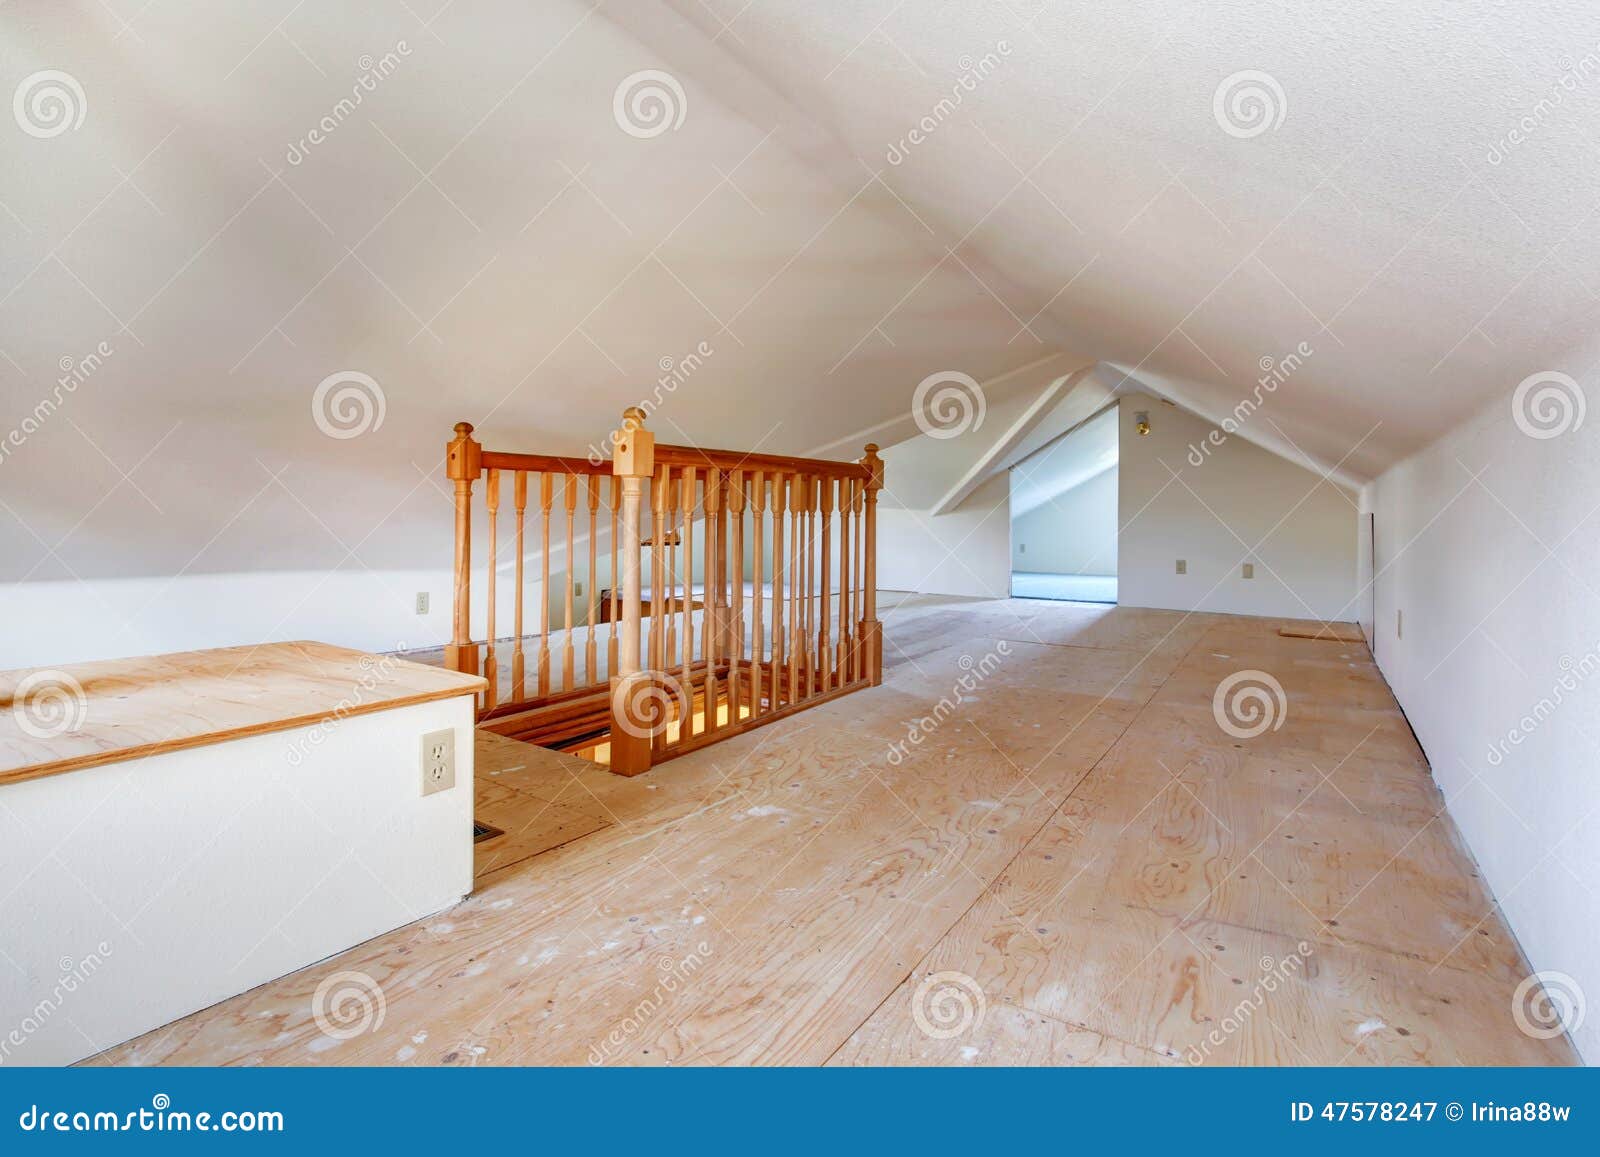 Upper Empty Room With Low Vaulted Ceiling Stock Image